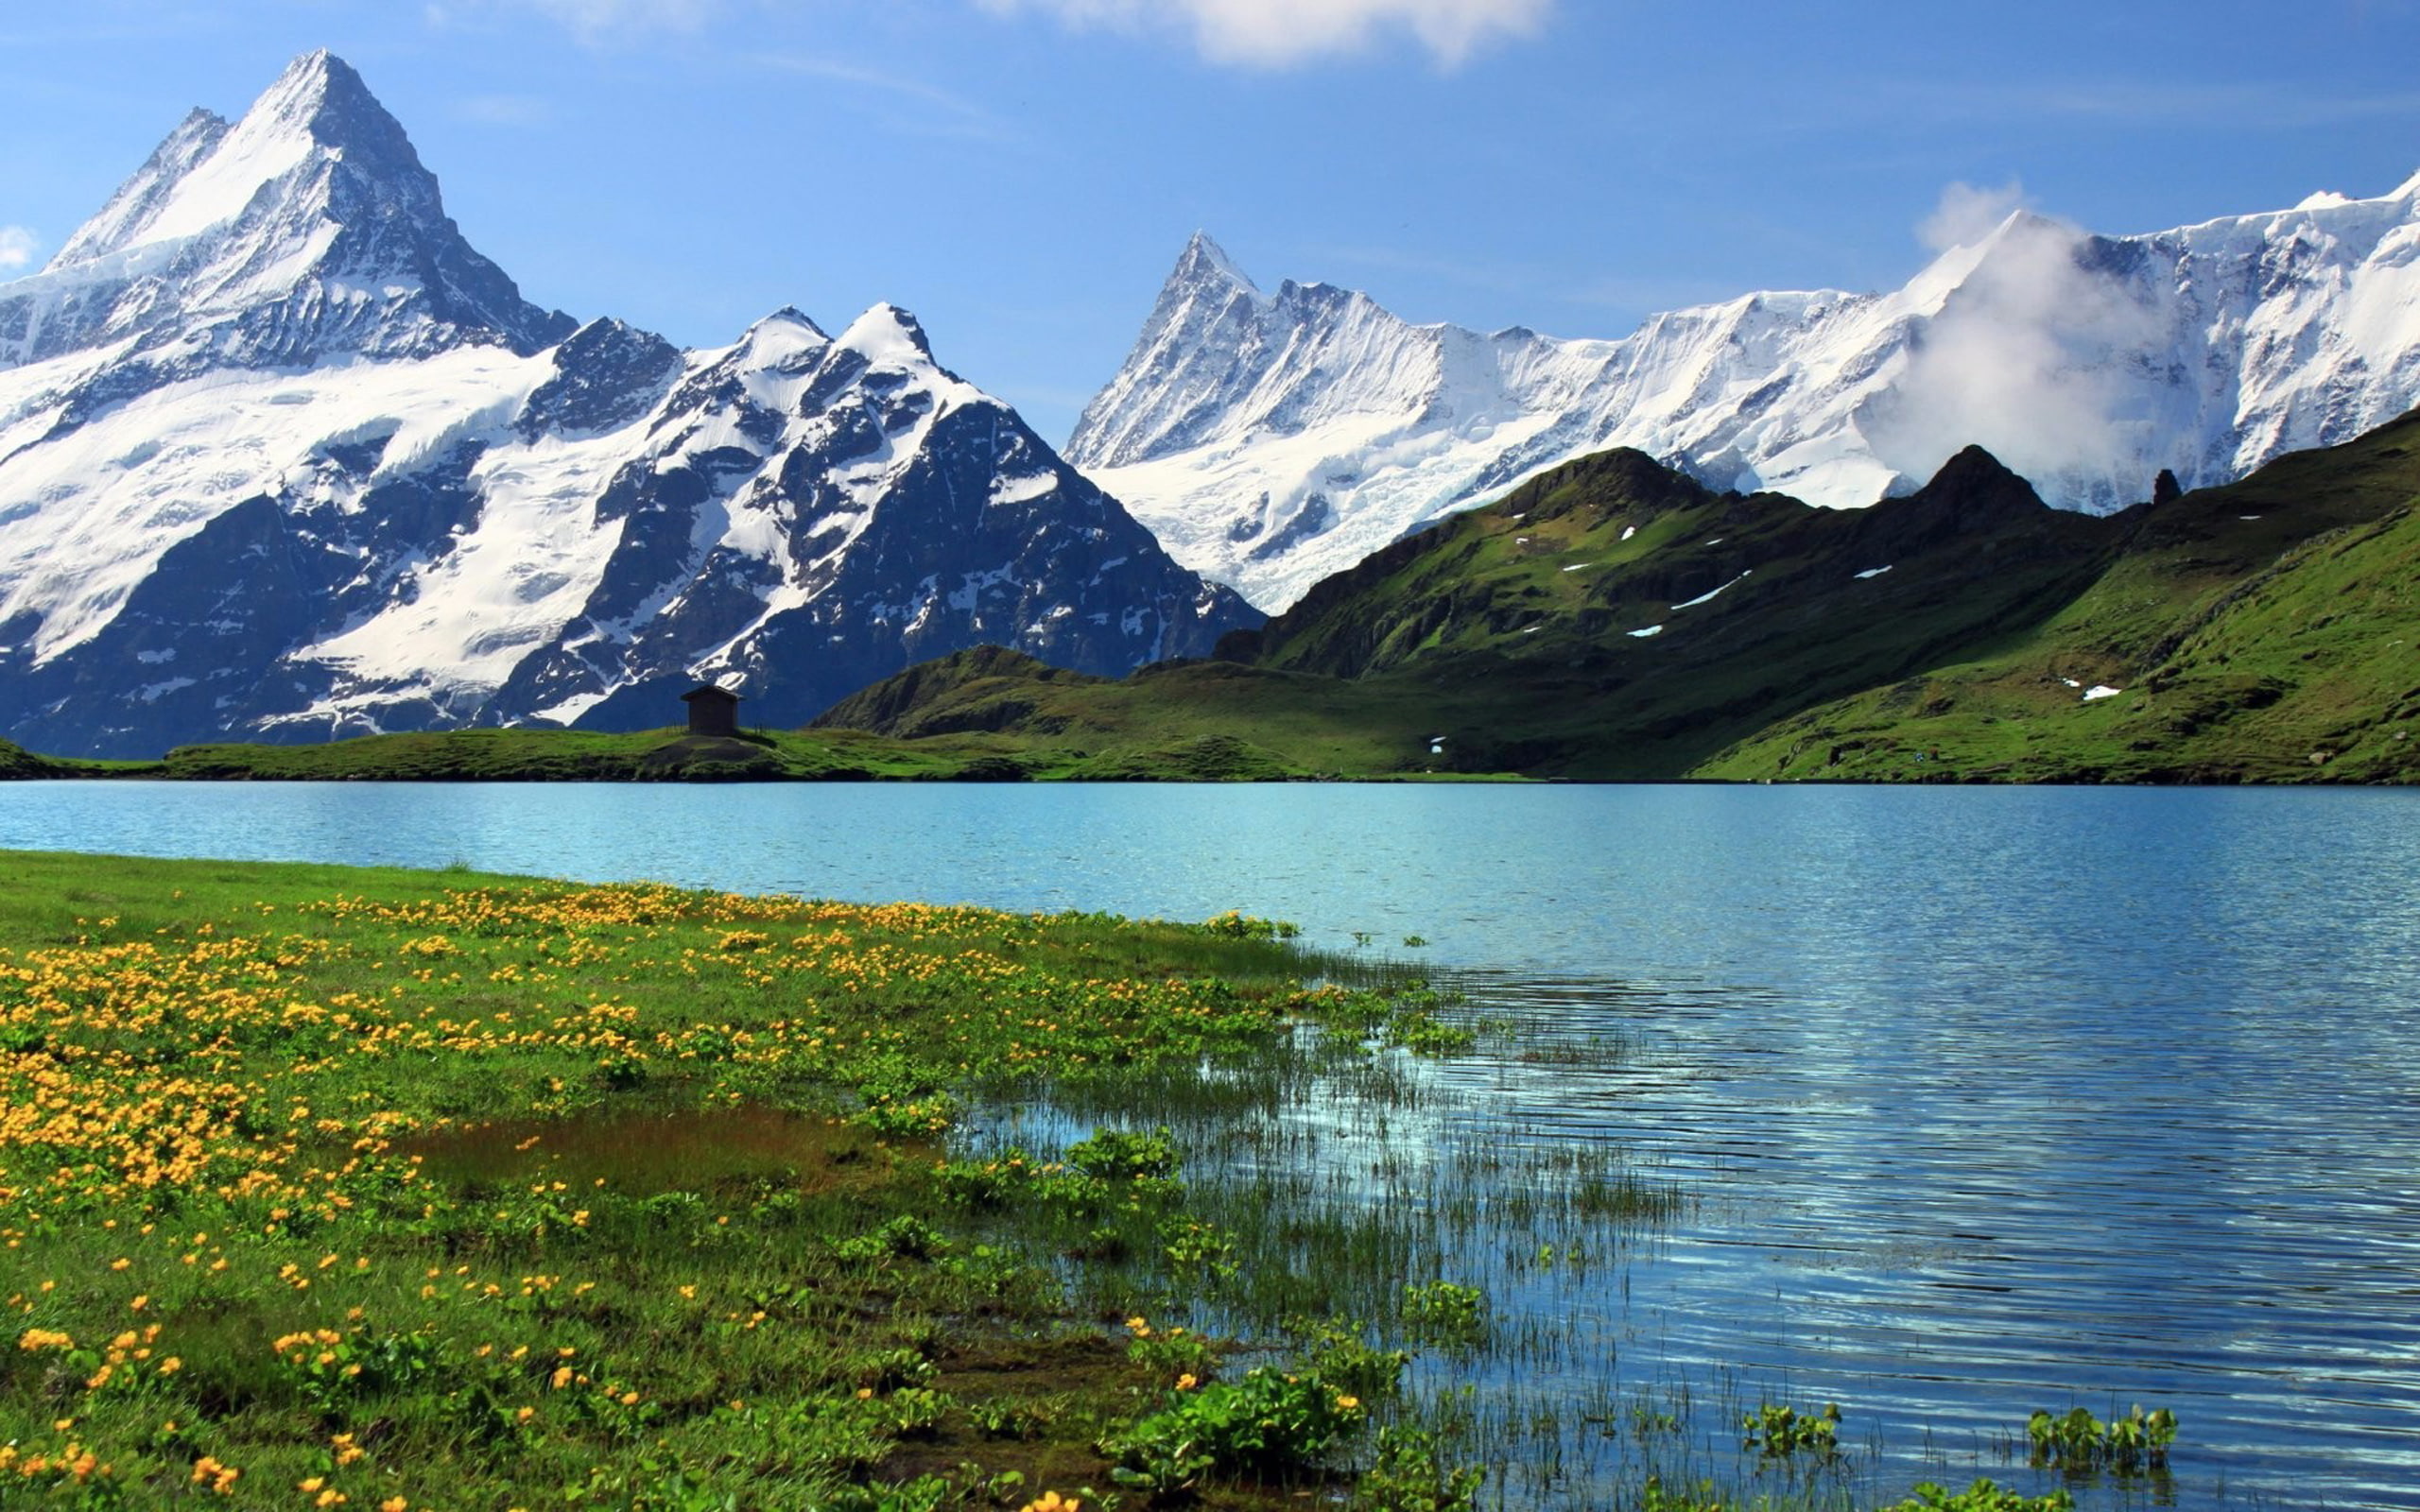 Rocky Mountain Snow Alps River Meadow With Green Grass And Yellow Flowers Blue Sky Switzerland Bern Wallpaper Widescreen Hd